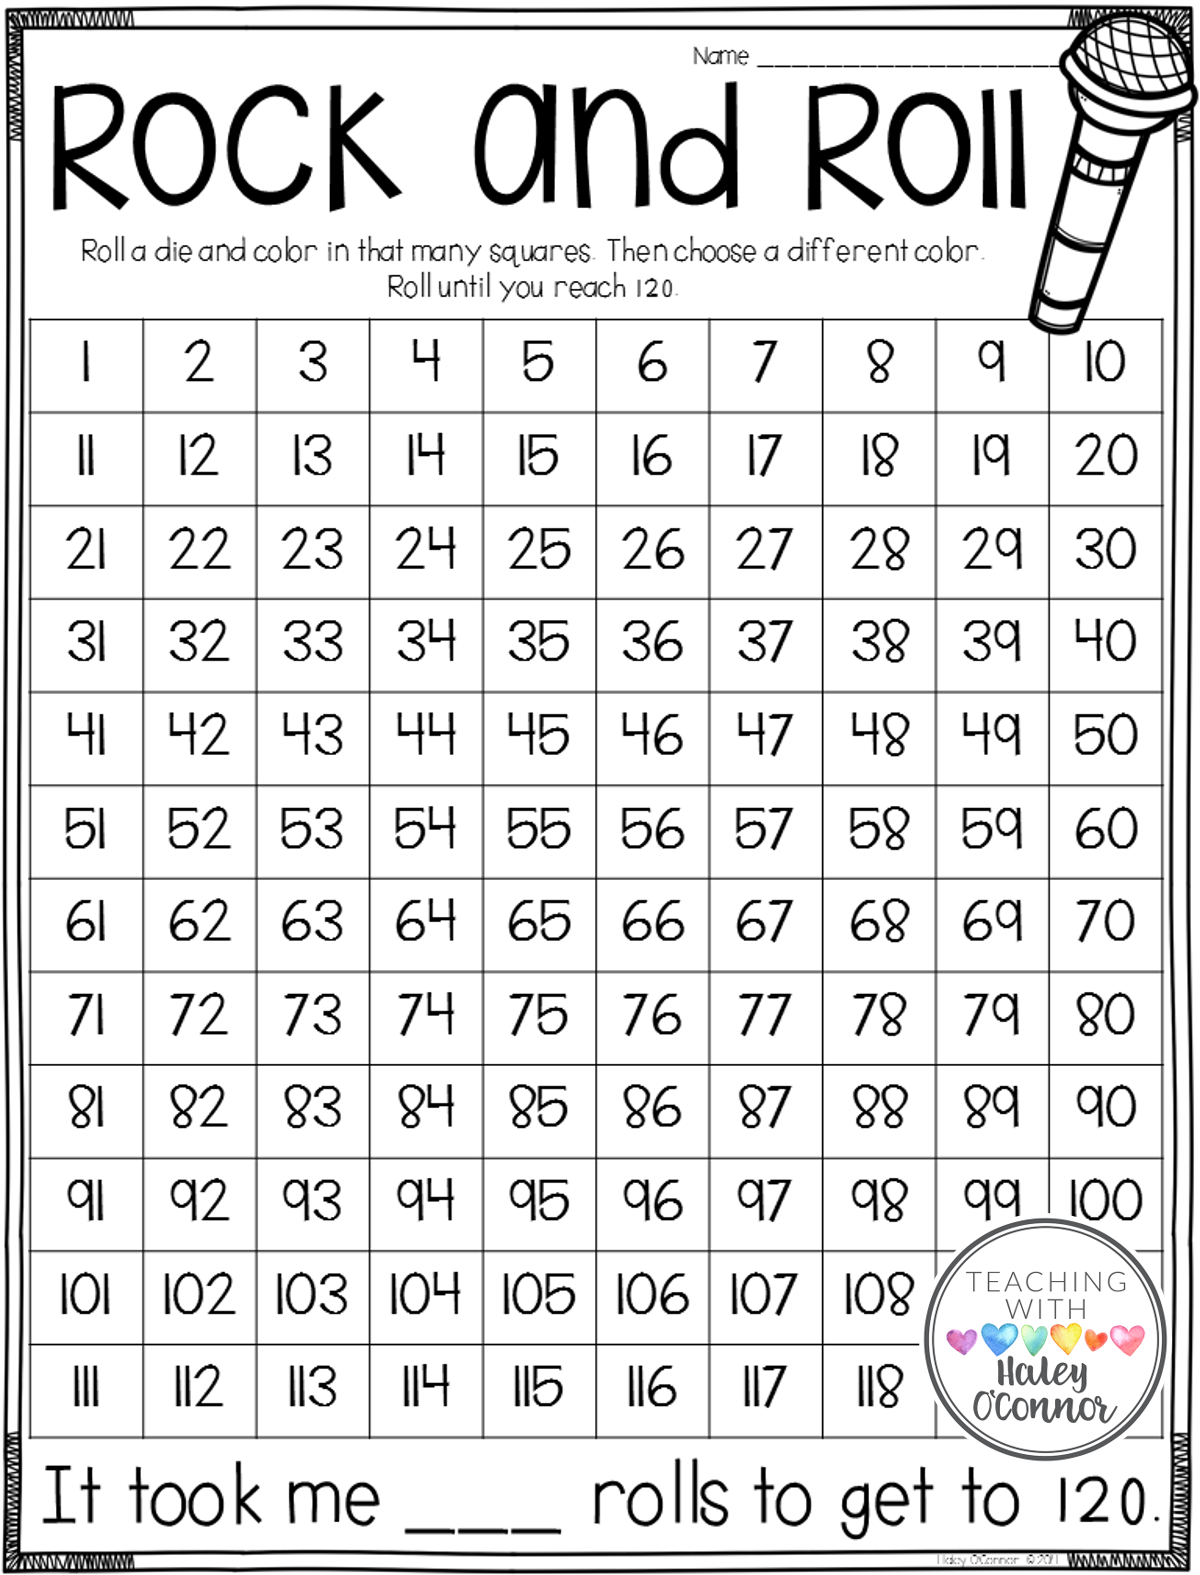 Rock and Roll Activity for 120th Day of School